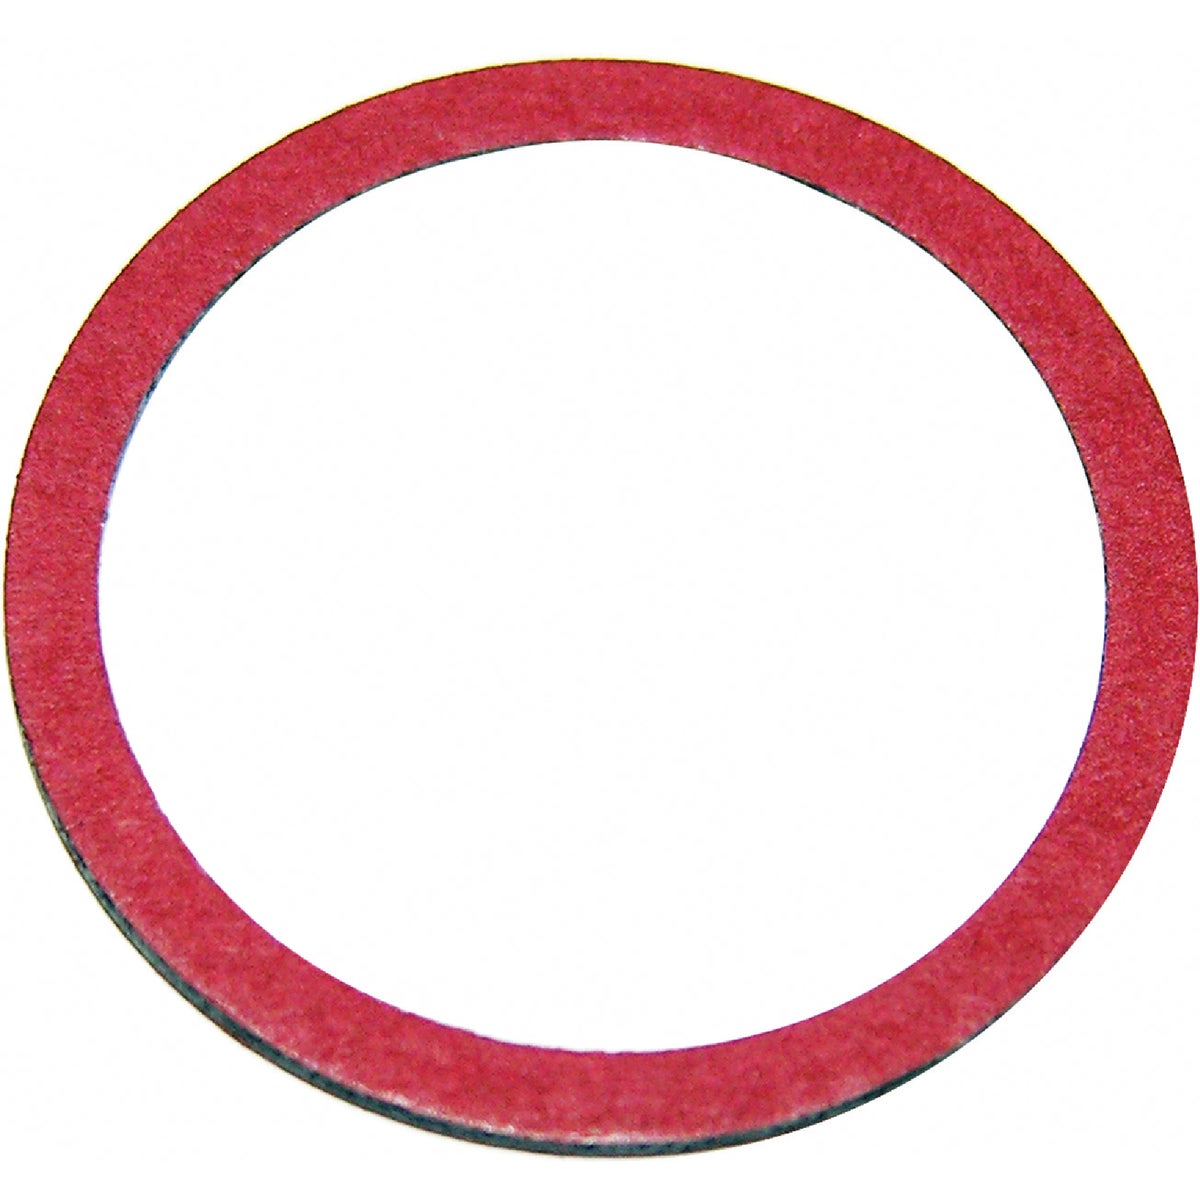 Lasco 02-1866P Lasco 1-5/32 In. Red Fiber Faucet Washer 02-1866P Pack of 10